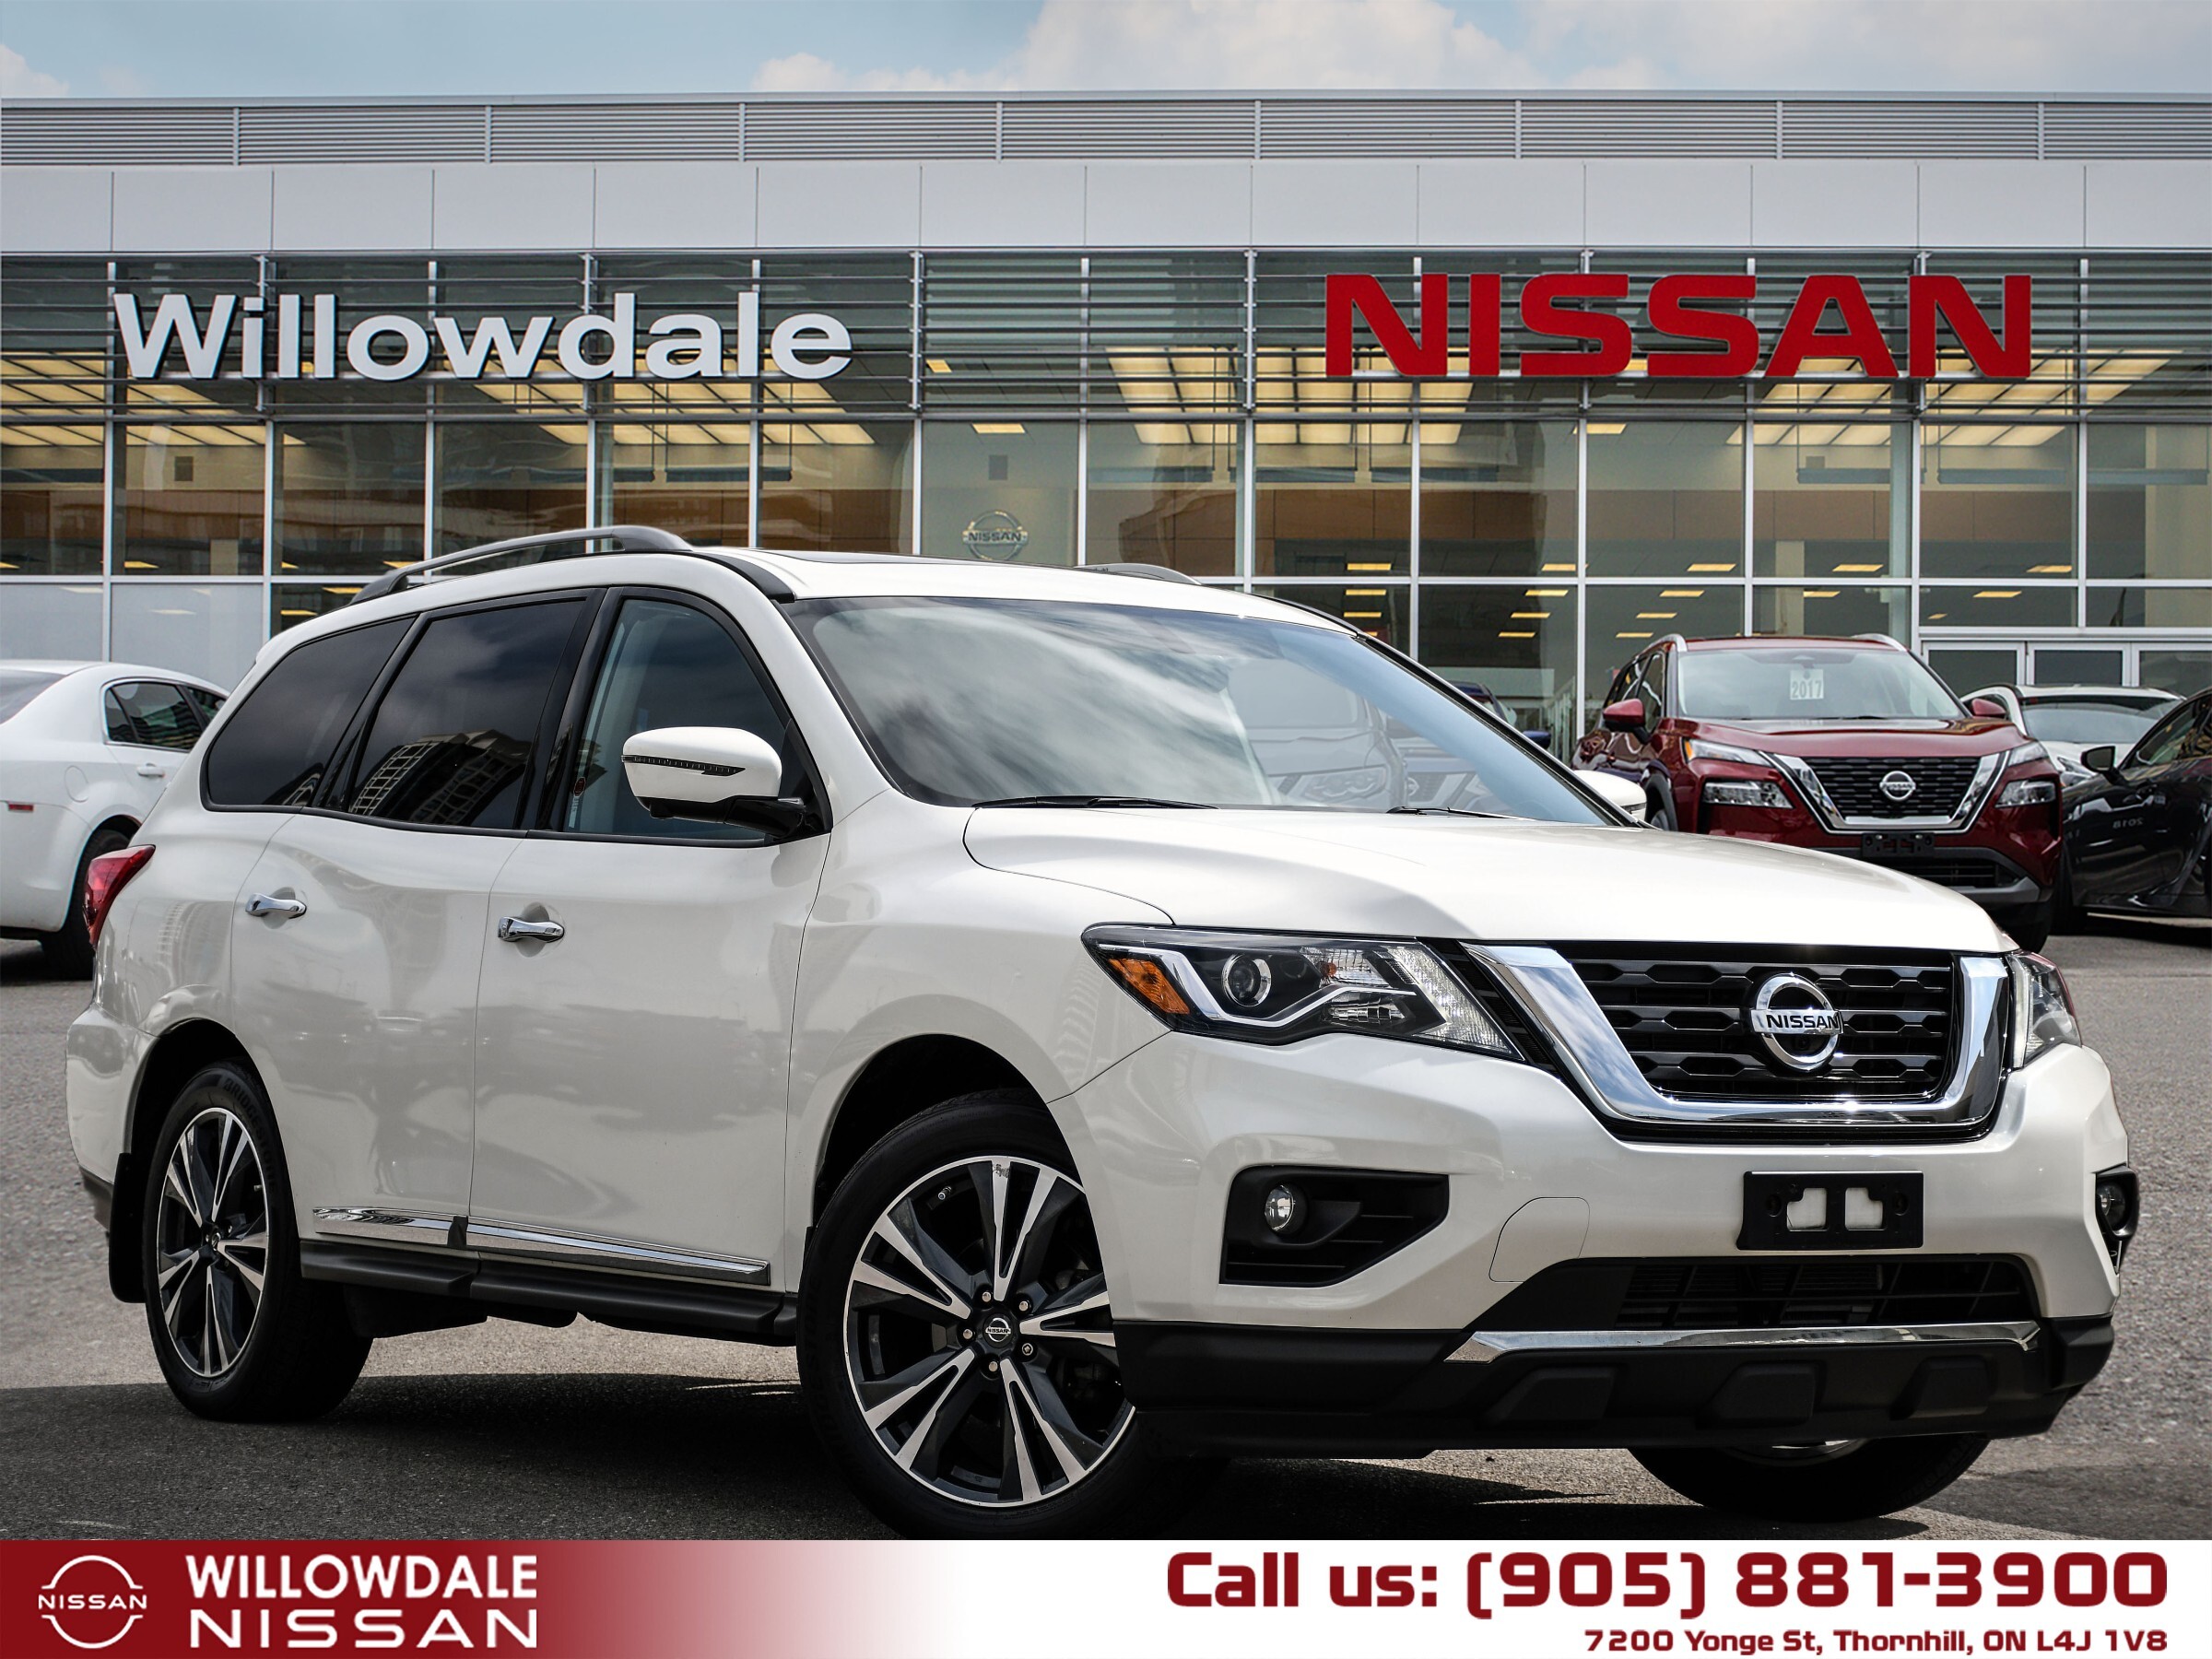 2019 Nissan Pathfinder Platinum - SALE EVENT MAY 24- MAY 25